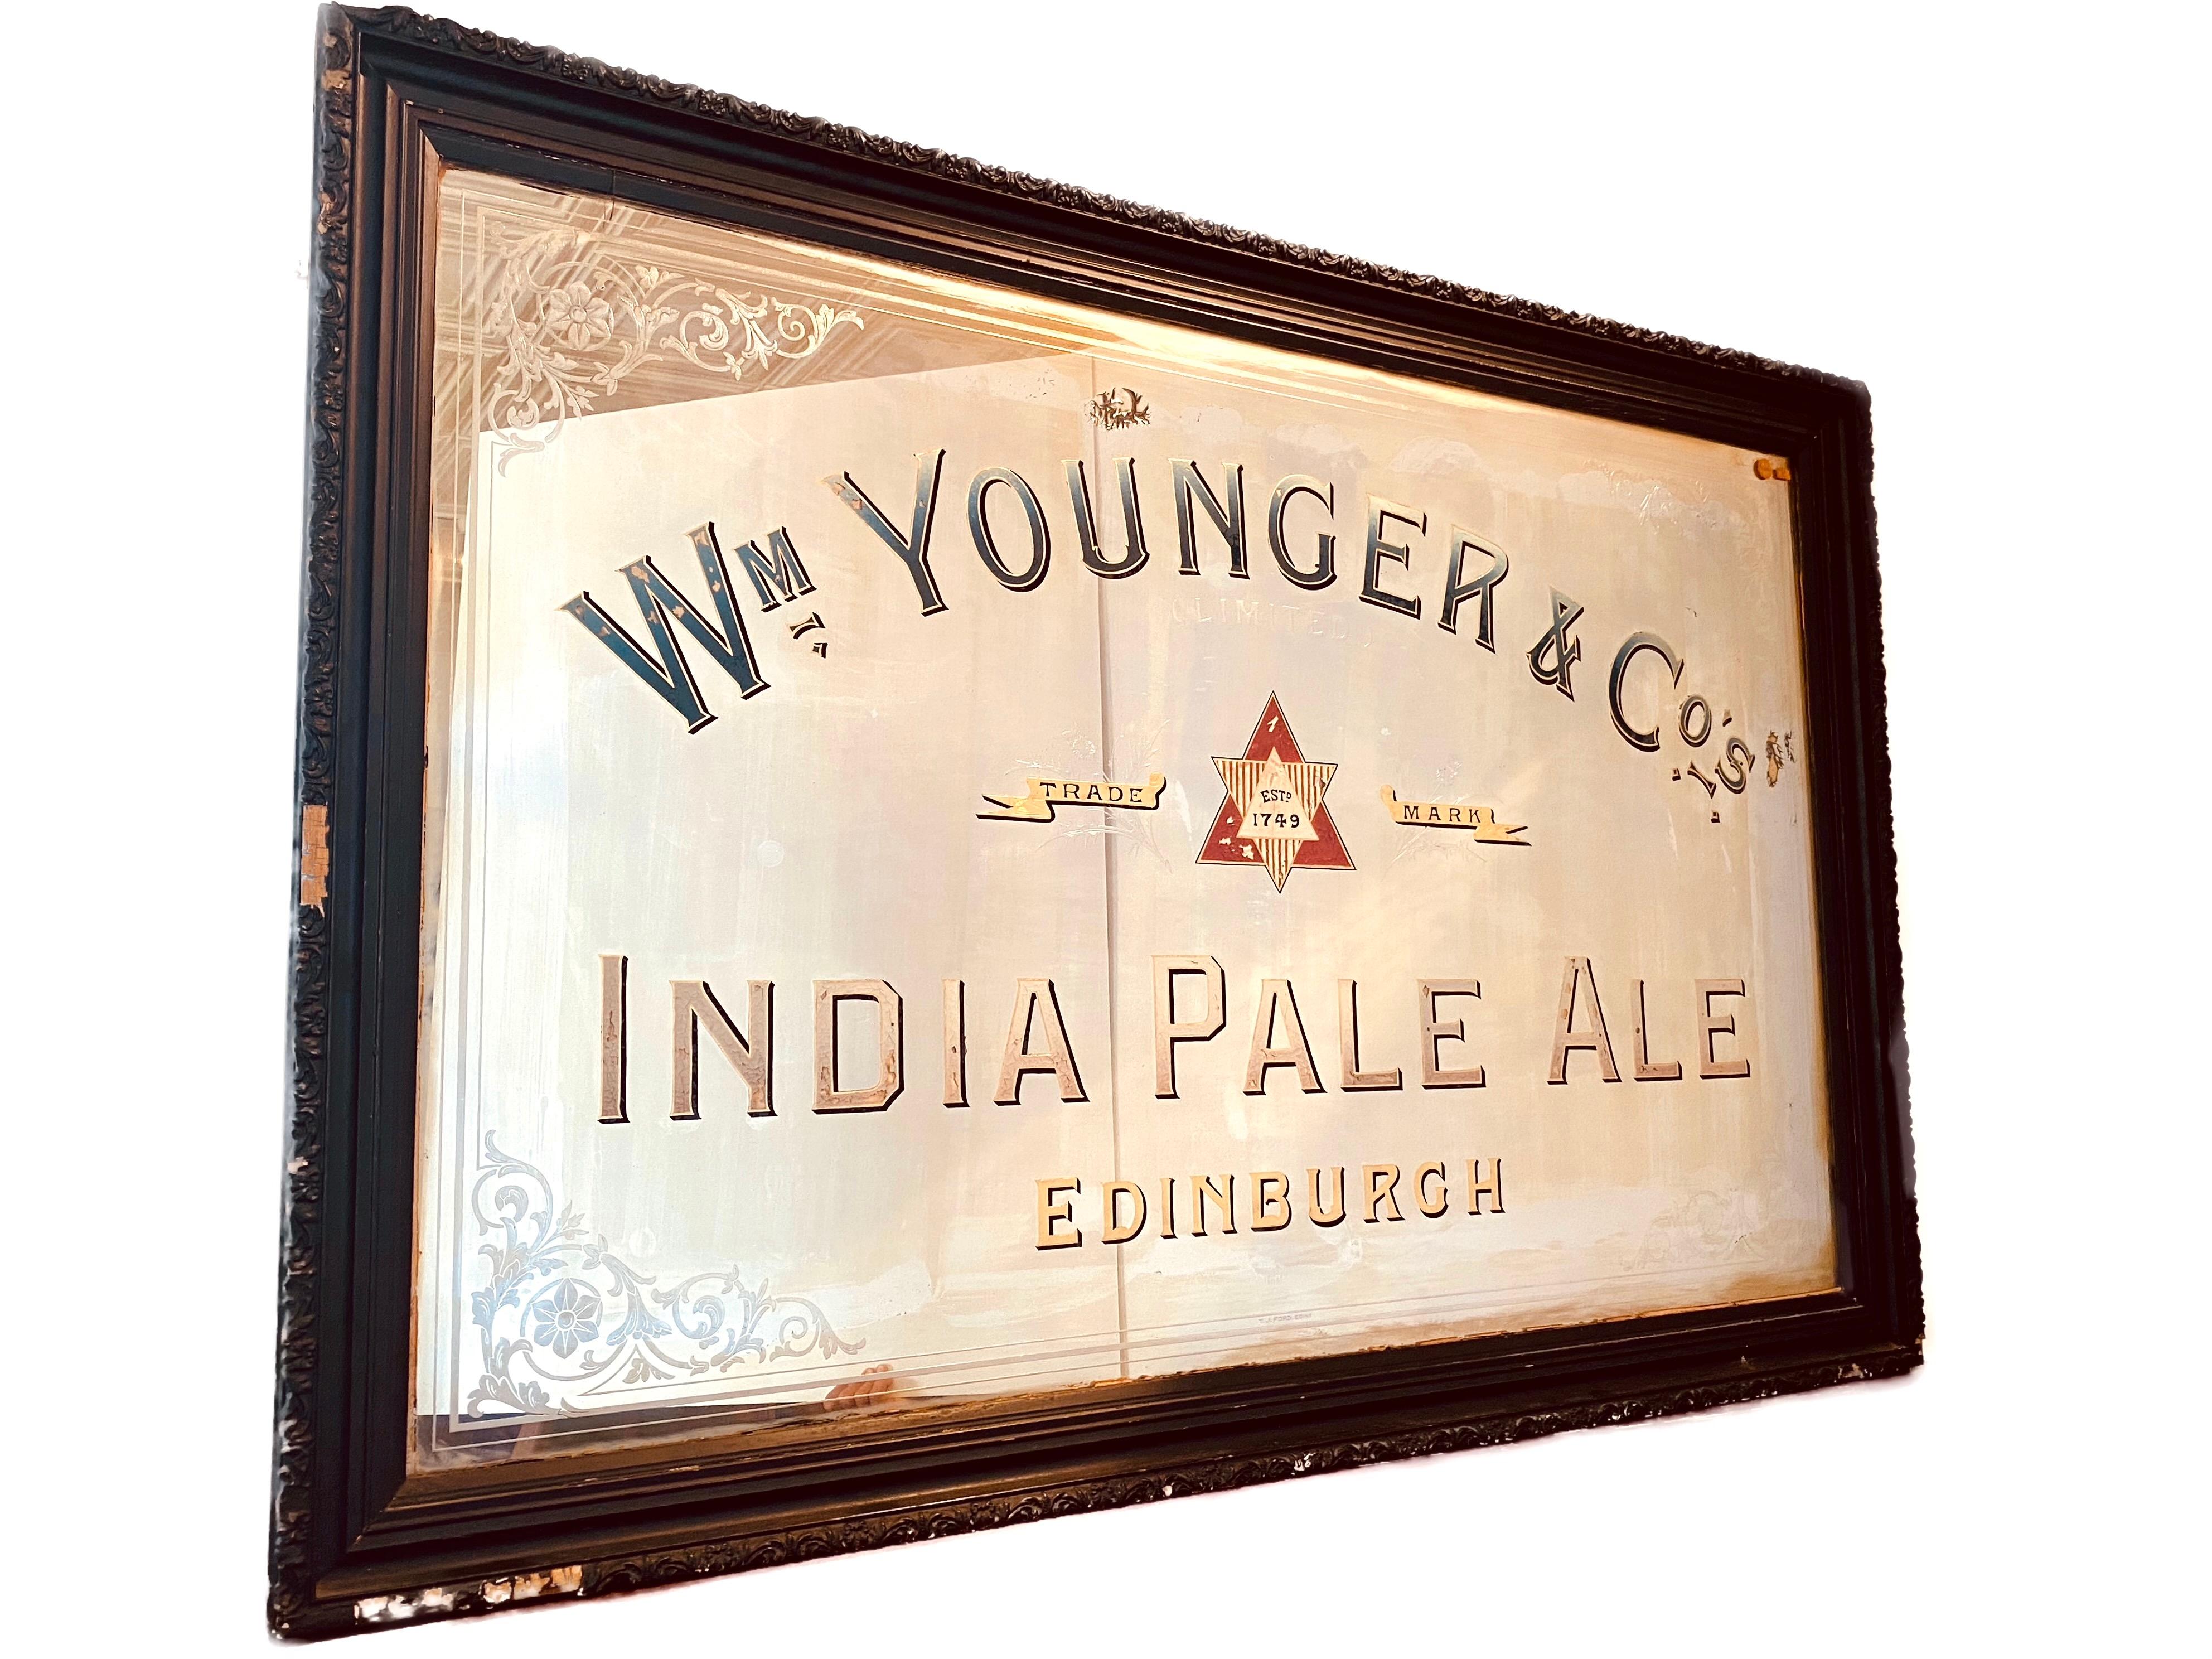 Beautiful Antique advertising mirror for IPA Beer of Younger's Brewery (William Younger & Company) was a brewery in Edinburgh which grew from humble beginnings in 1749 to become one of the city’s main commercial enterprises, supplying domestic and